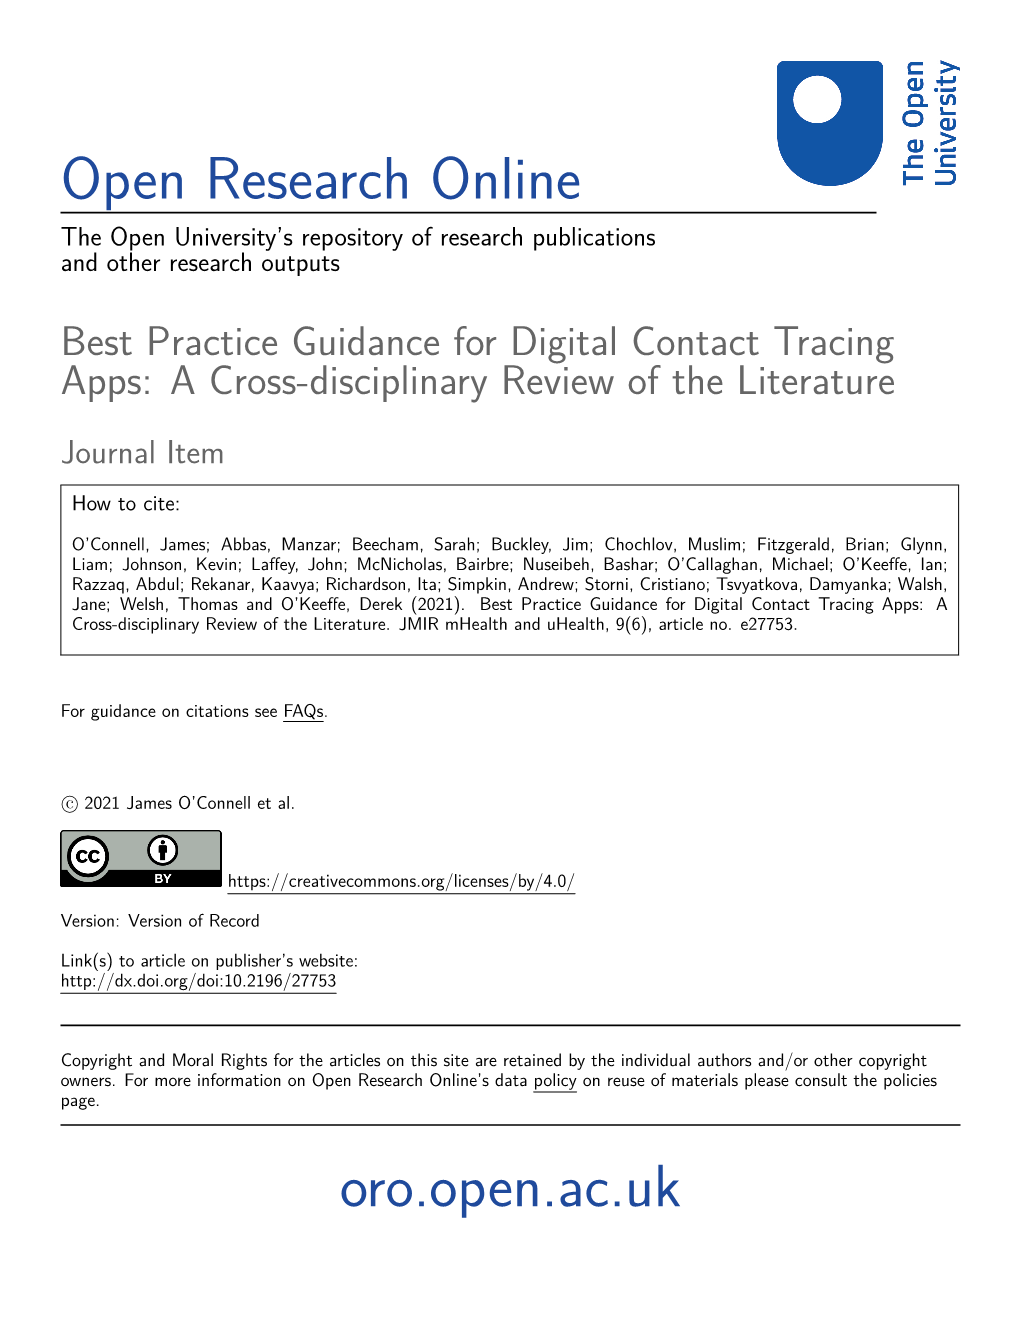 Best Practice Guidance for Digital Contact Tracing Apps: a Cross-Disciplinary Review of the Literature